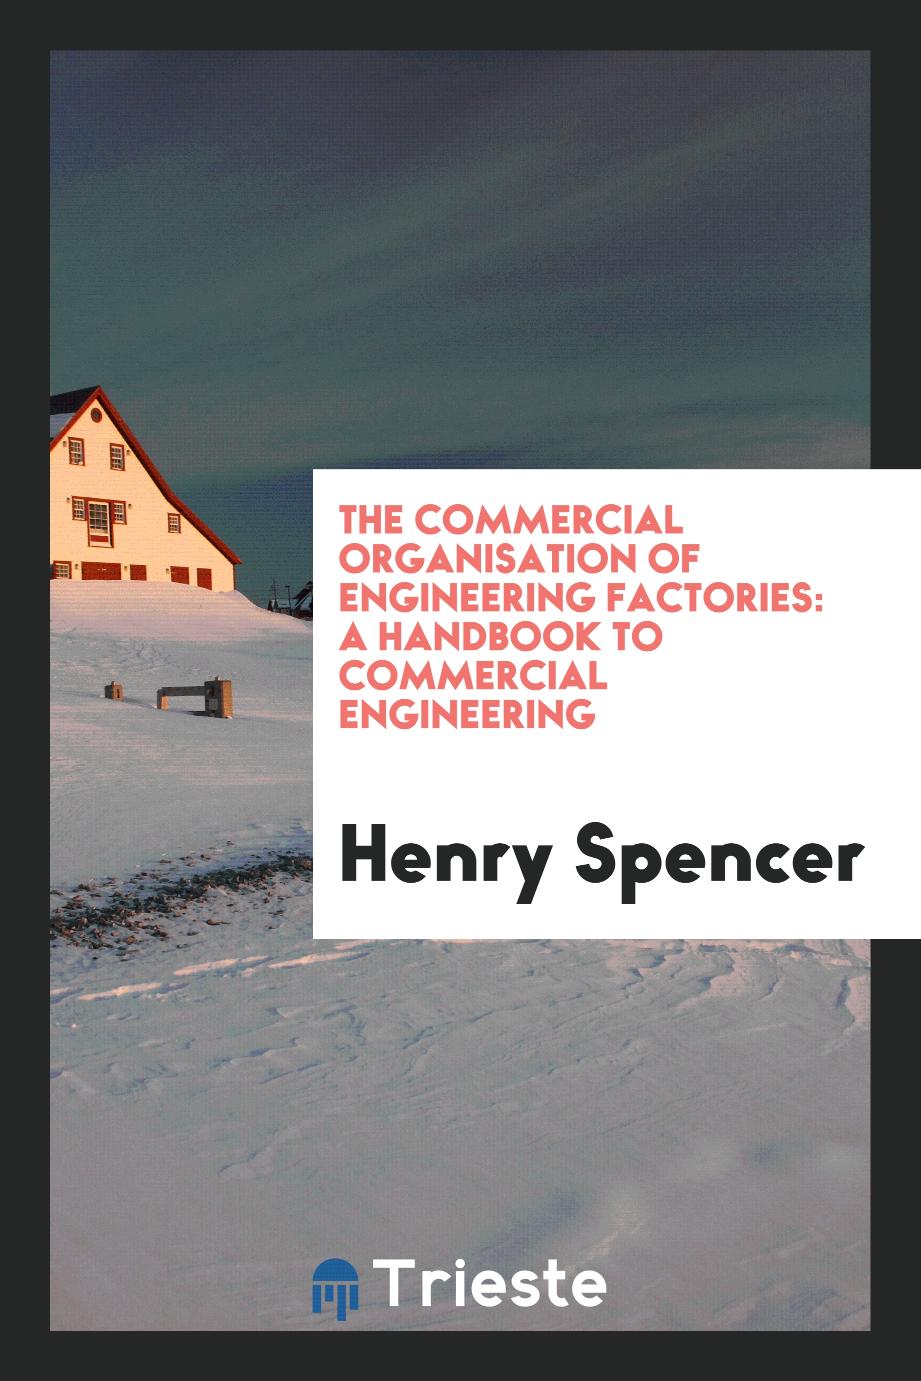 The Commercial Organisation of Engineering Factories: A Handbook to Commercial Engineering